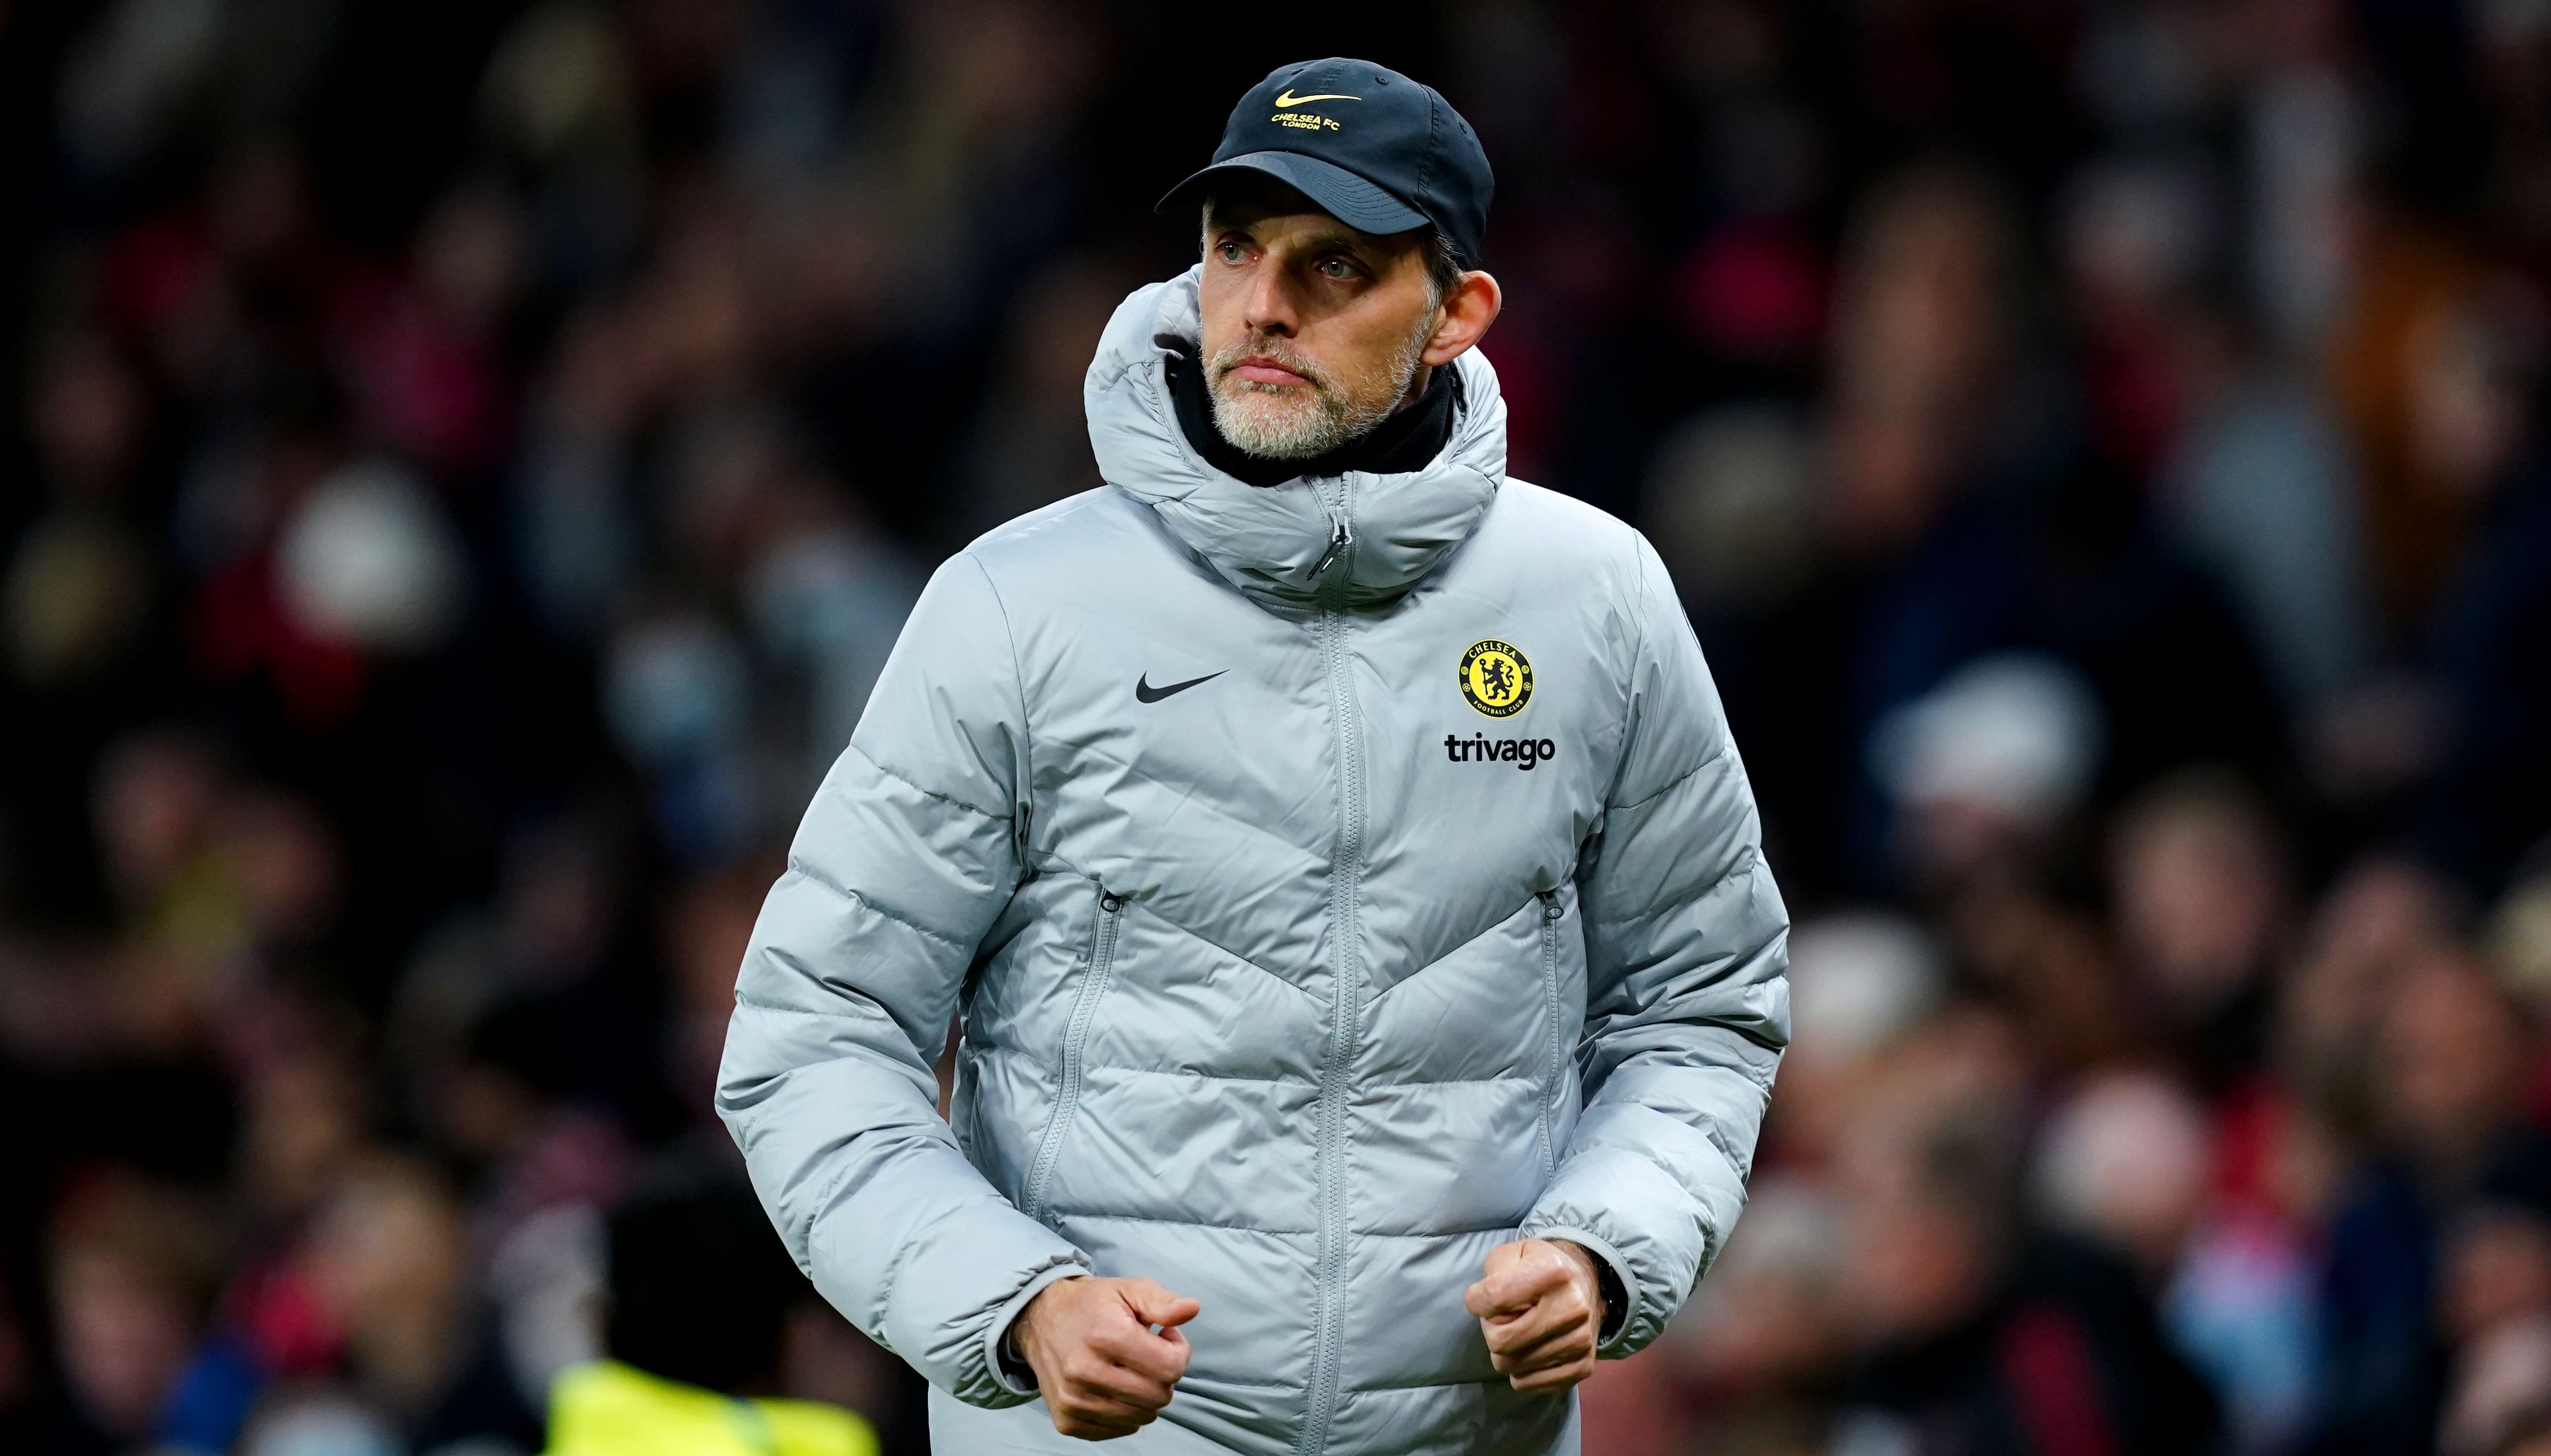 Chelsea manager Thomas Tuchel revealed on Friday he was \u201cconfident\u201d that the Blues were closing in on a sale of the club.